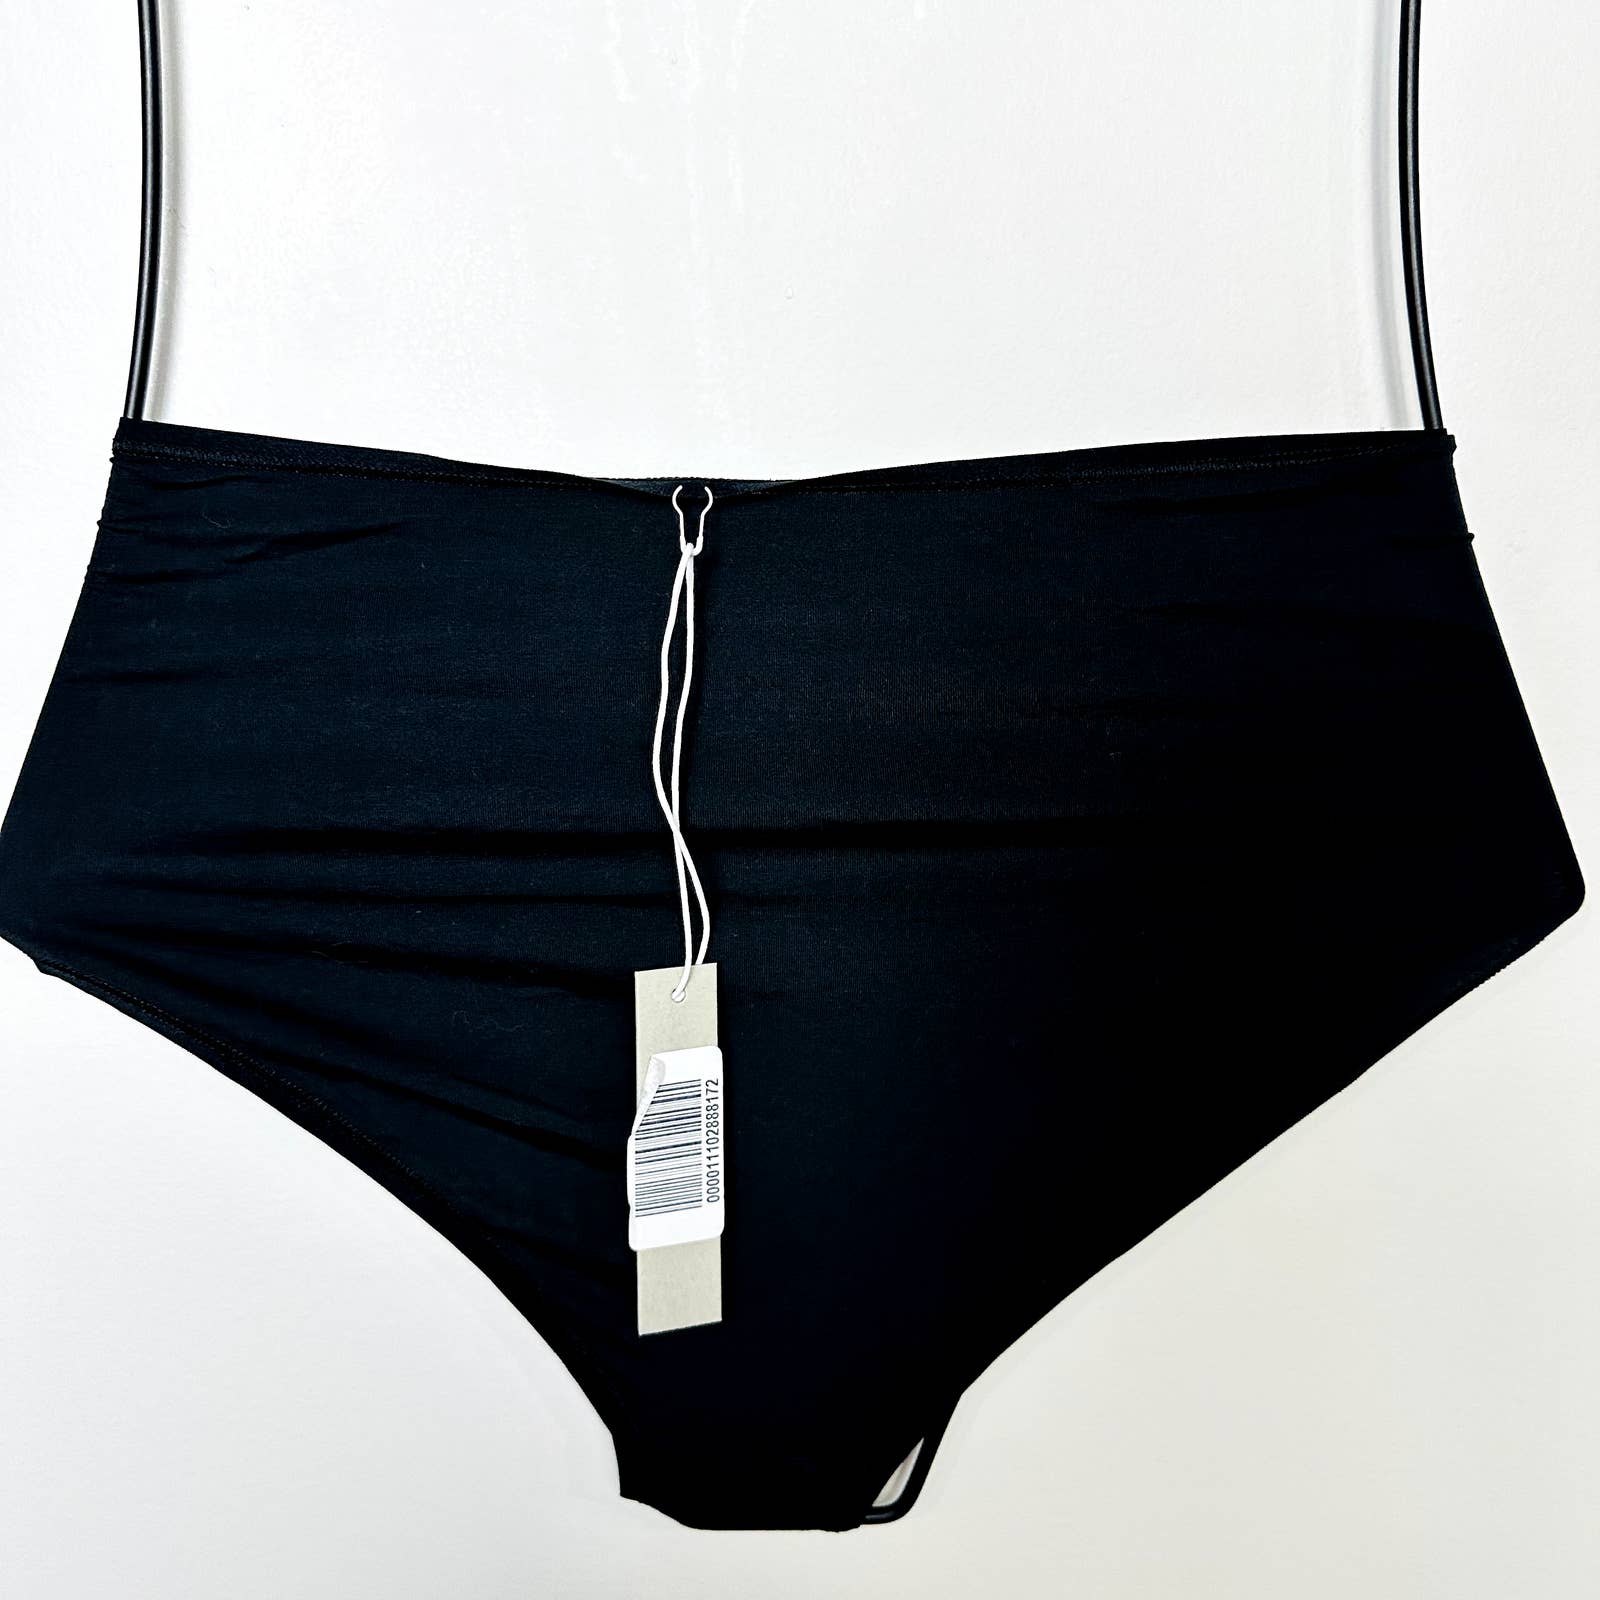 Everlane NWT The High-Rise Hipster Bottom Casual Comfy Panty Black Size Small